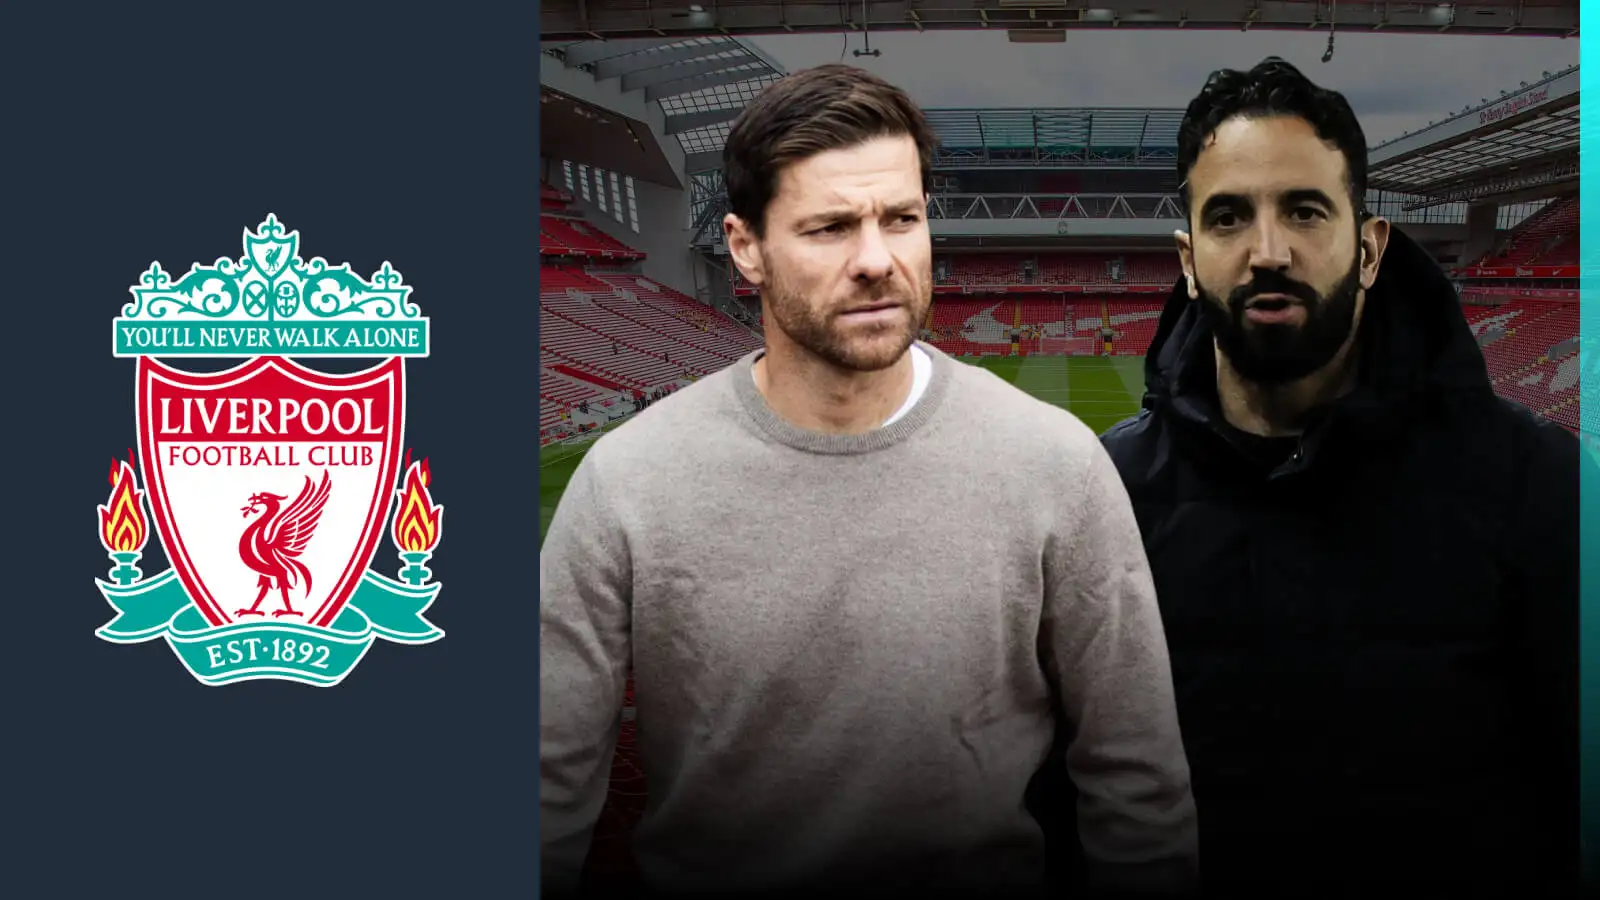 Xabi Alonso and also Ruben Amorim are frontrunners to match Jurgen Klopp at Liverpool.